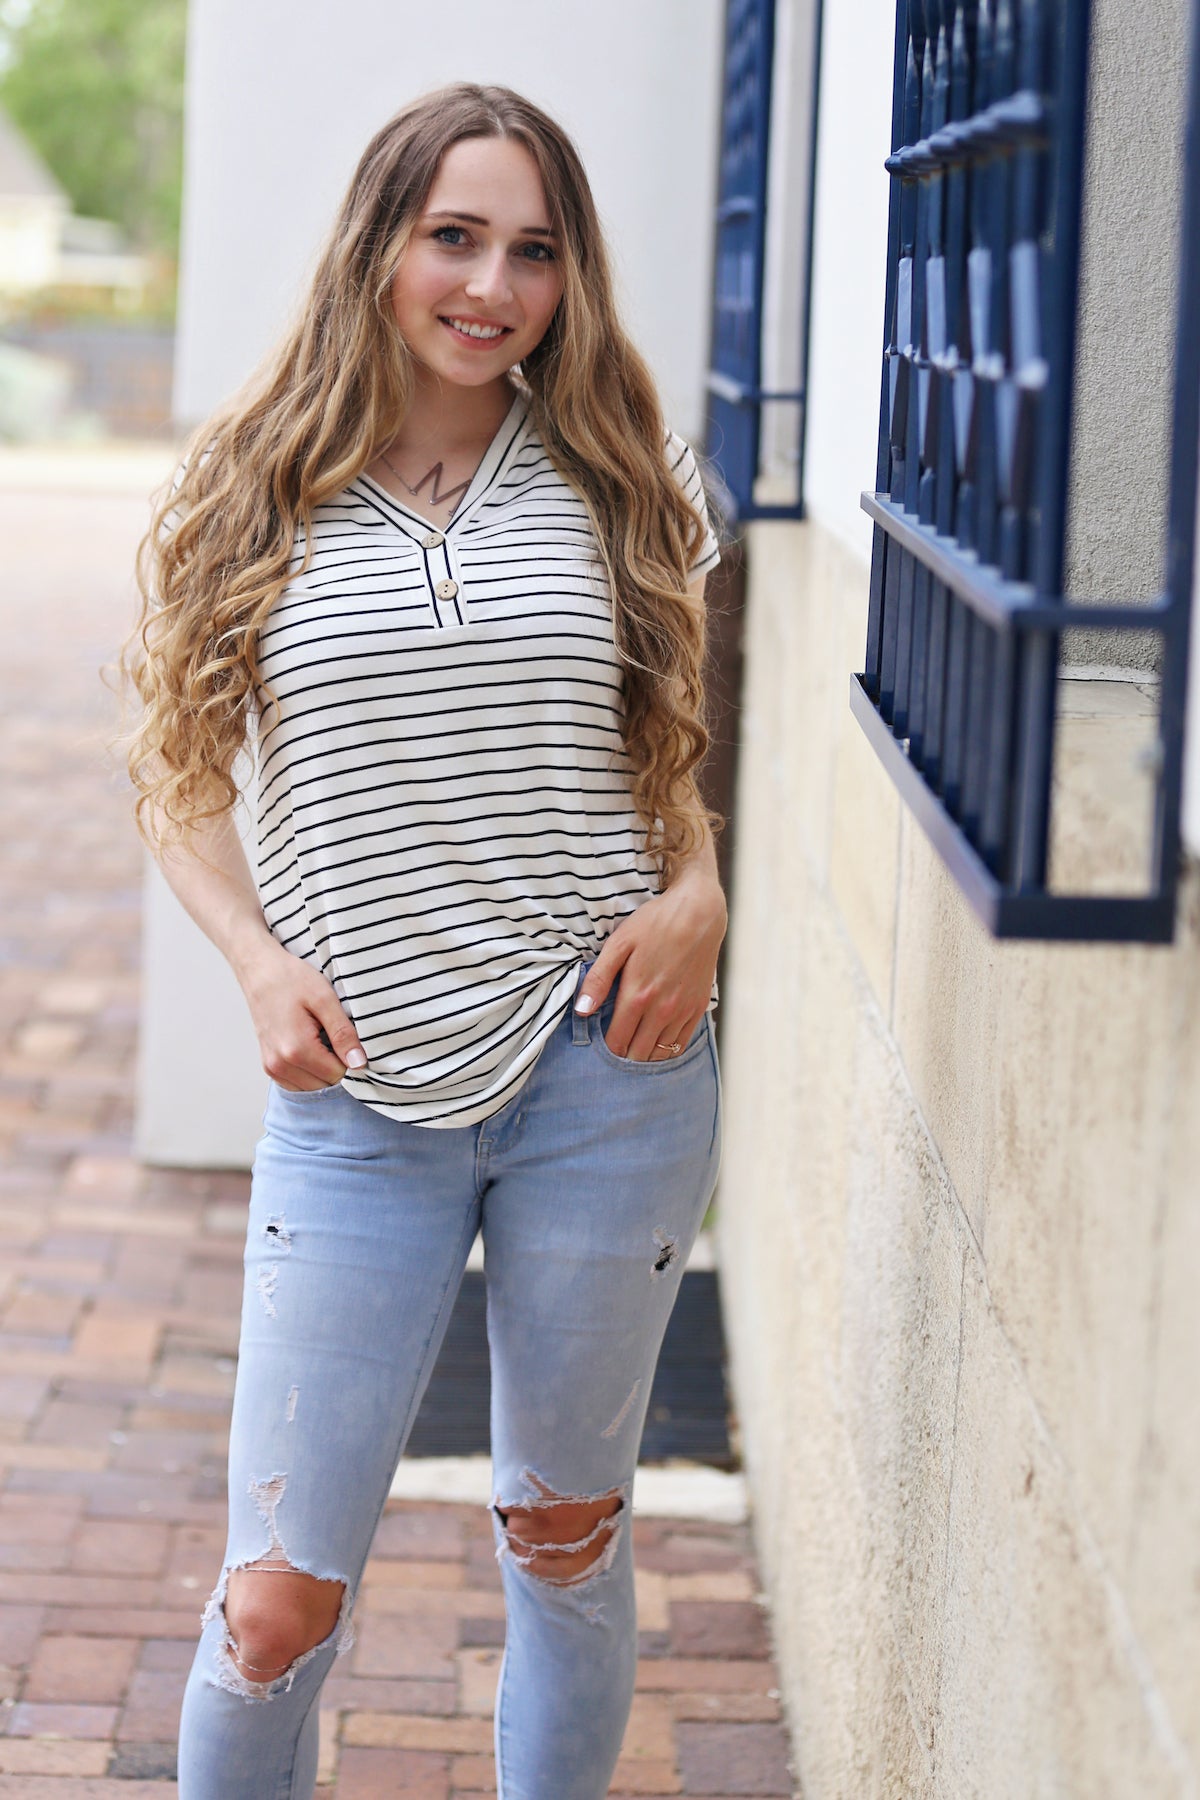 Striped Nautical Top - All Sales Final